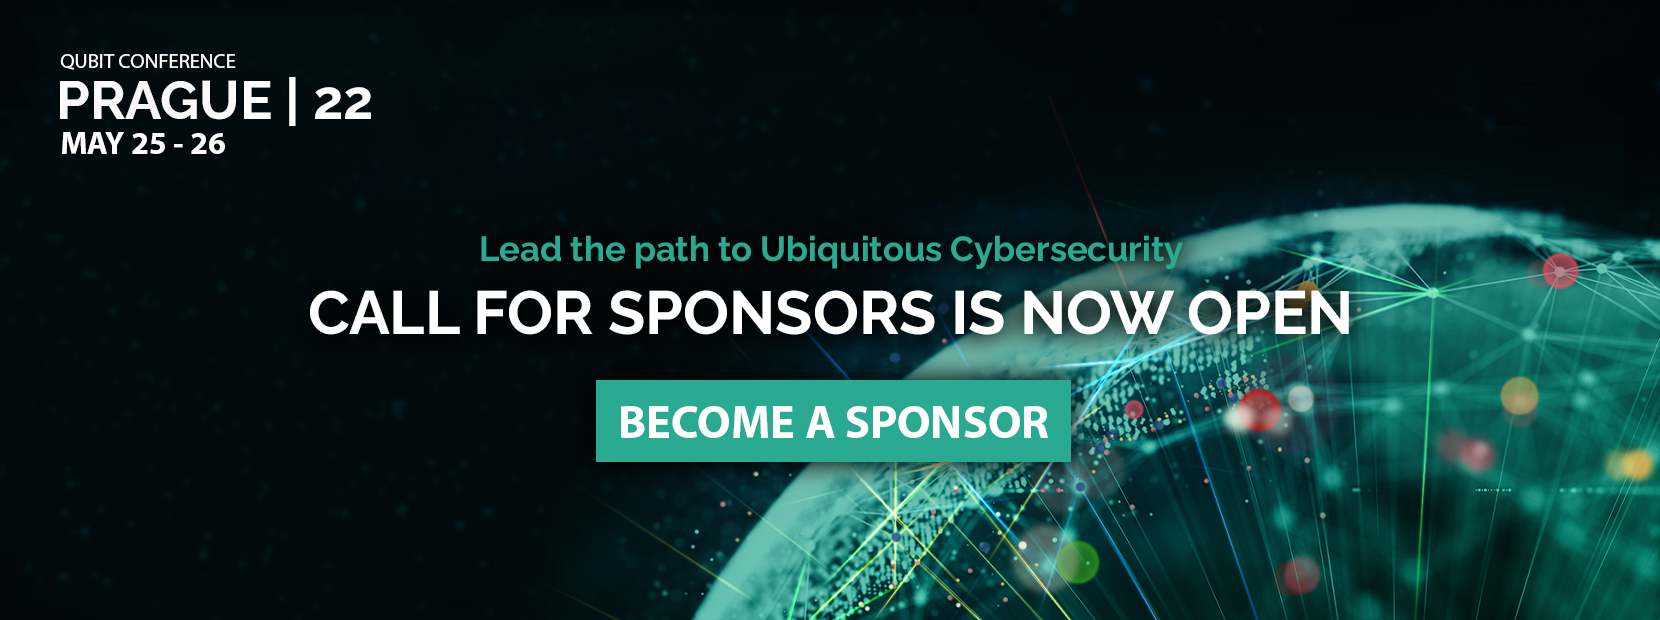 Cybersecurity Conference in Prague, Call for sponsors